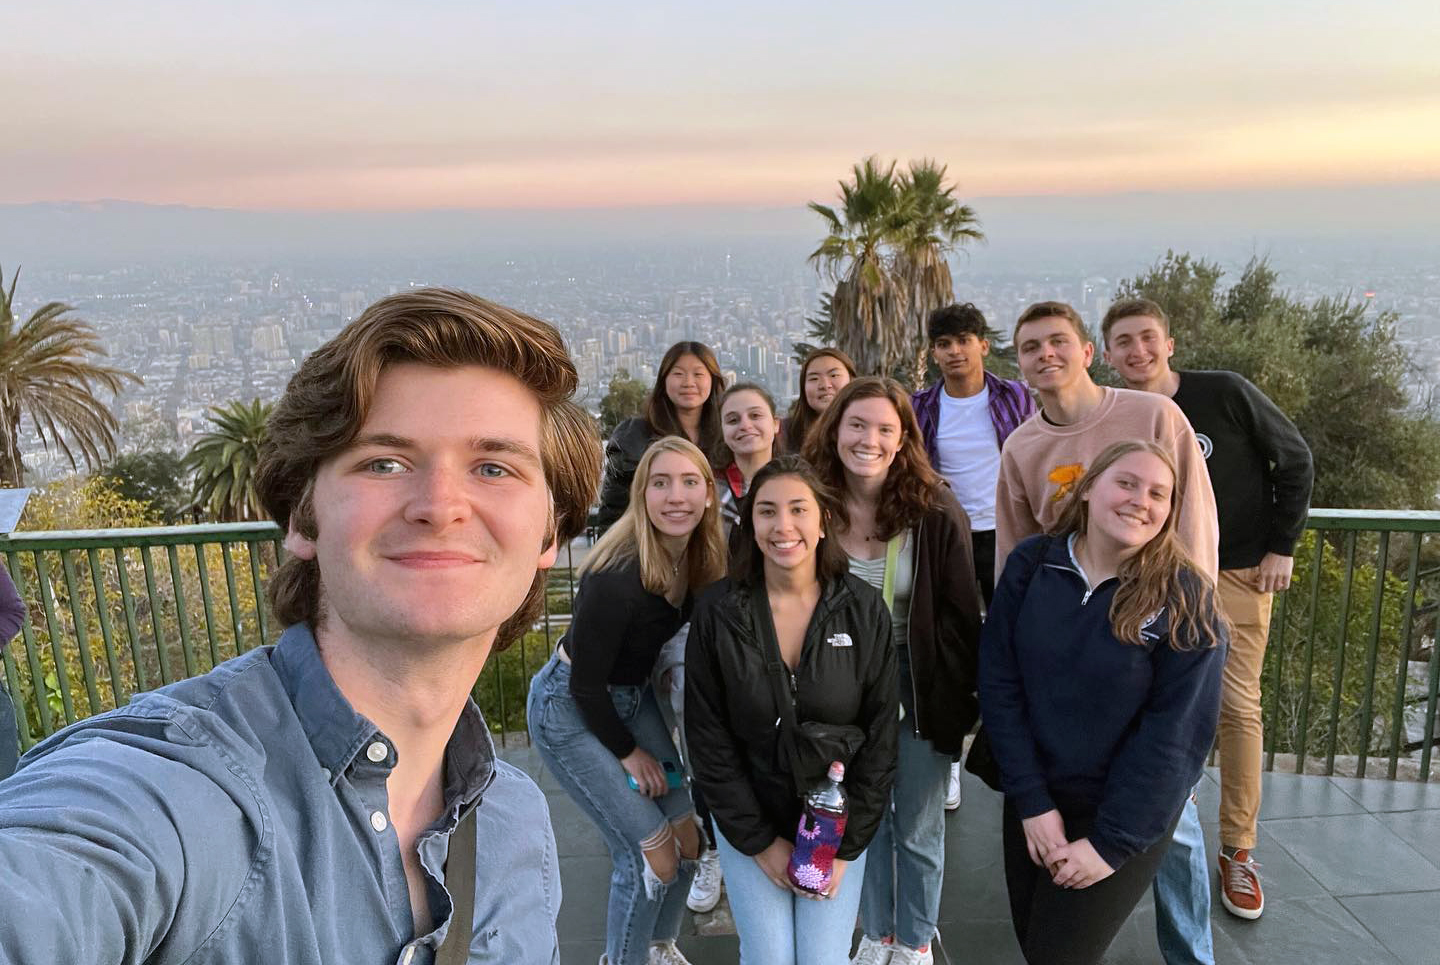 A group selfie shot of the Glee Club overlooking a cityscape in Santiago Chile.